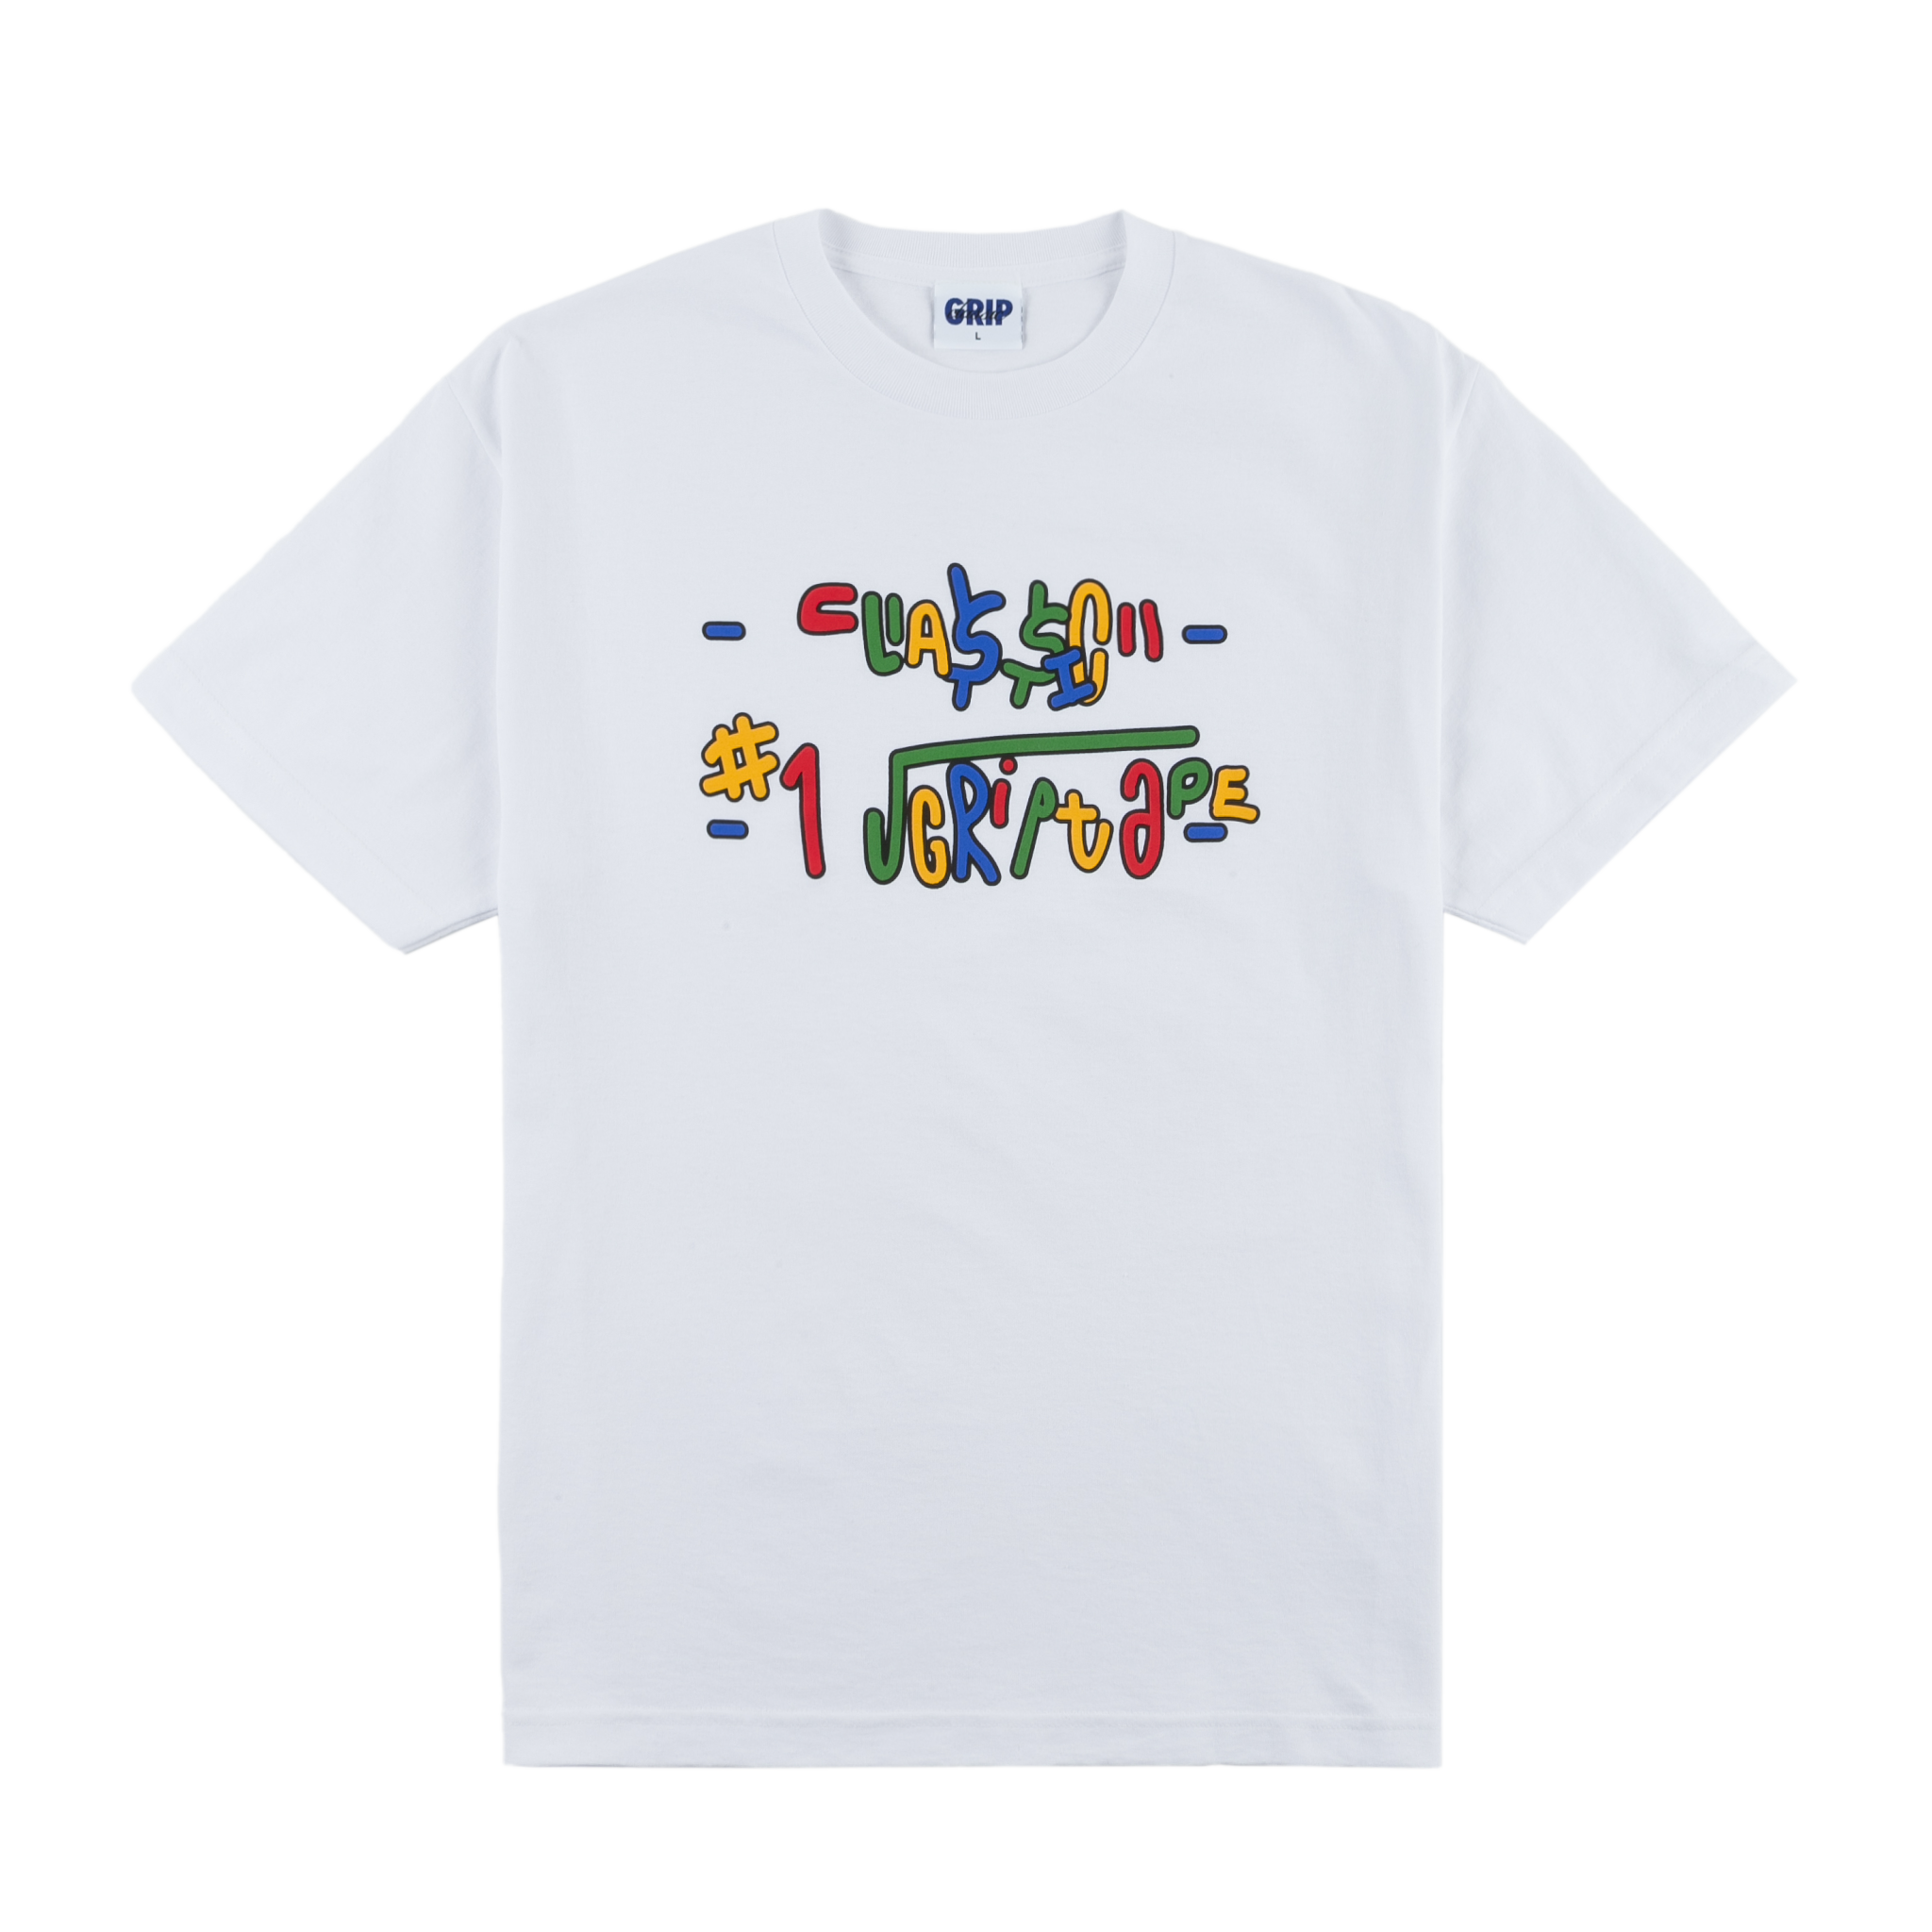 CLASSIC GRIP / FUCK YOU TEE WHITE | THE NEWAGE CLUB powered by BASE